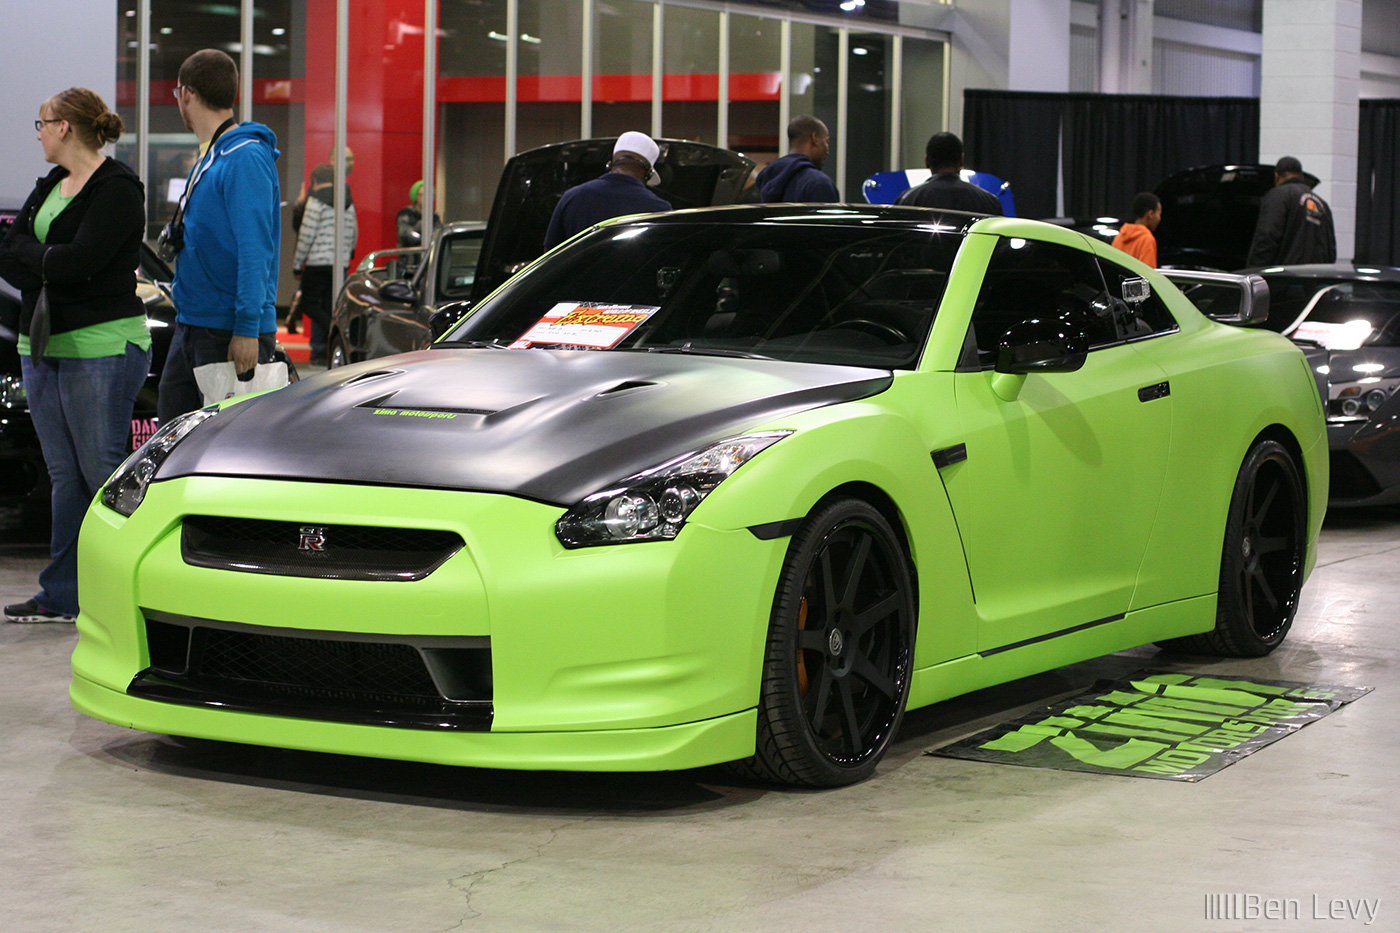 Lime Green Nissan GT-R